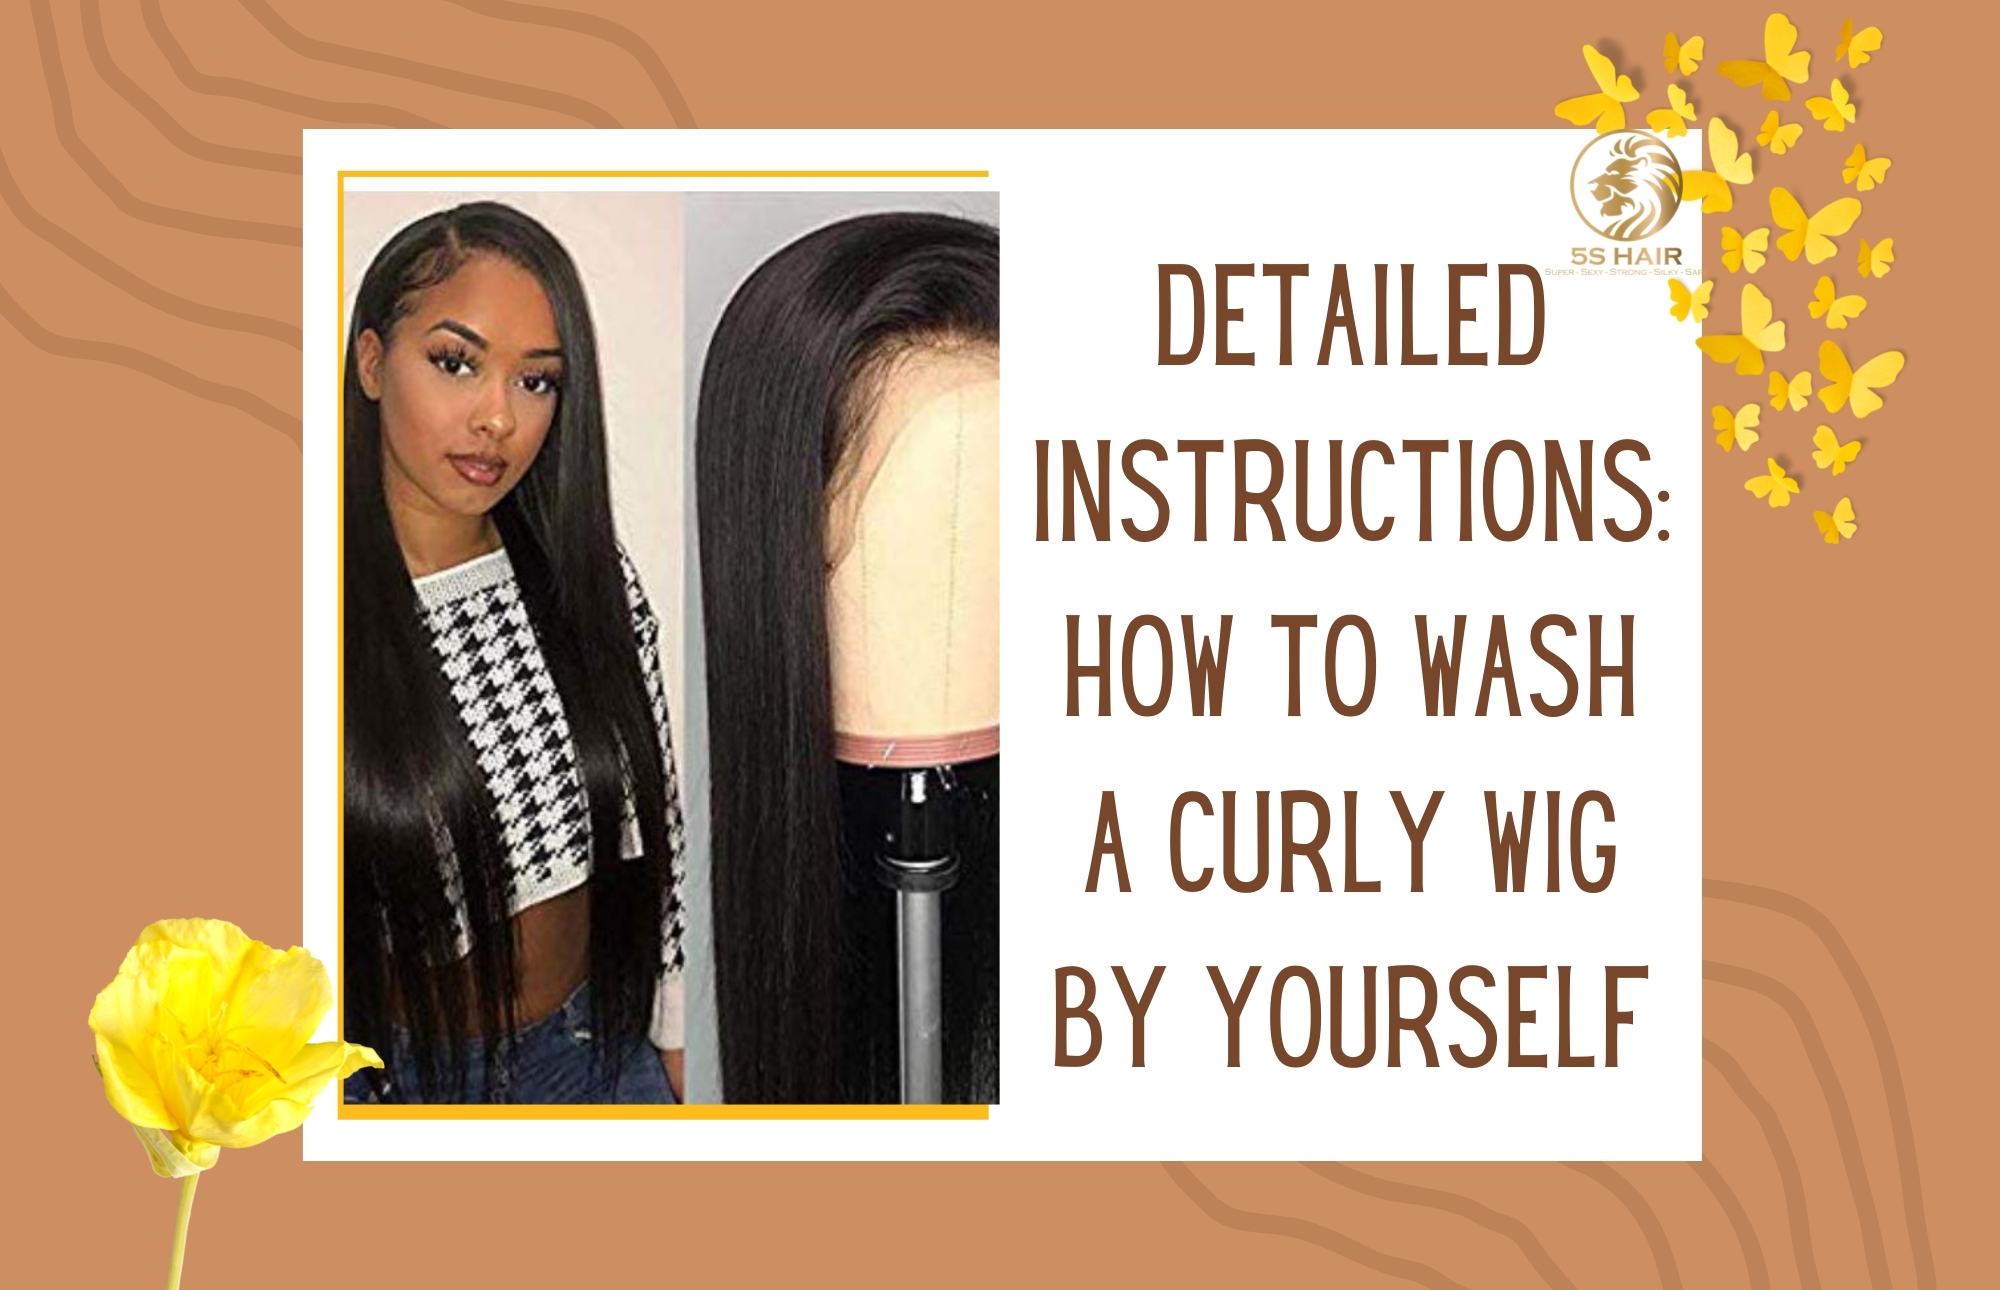 Detailed instructions: How to wash a curly wig by yourself